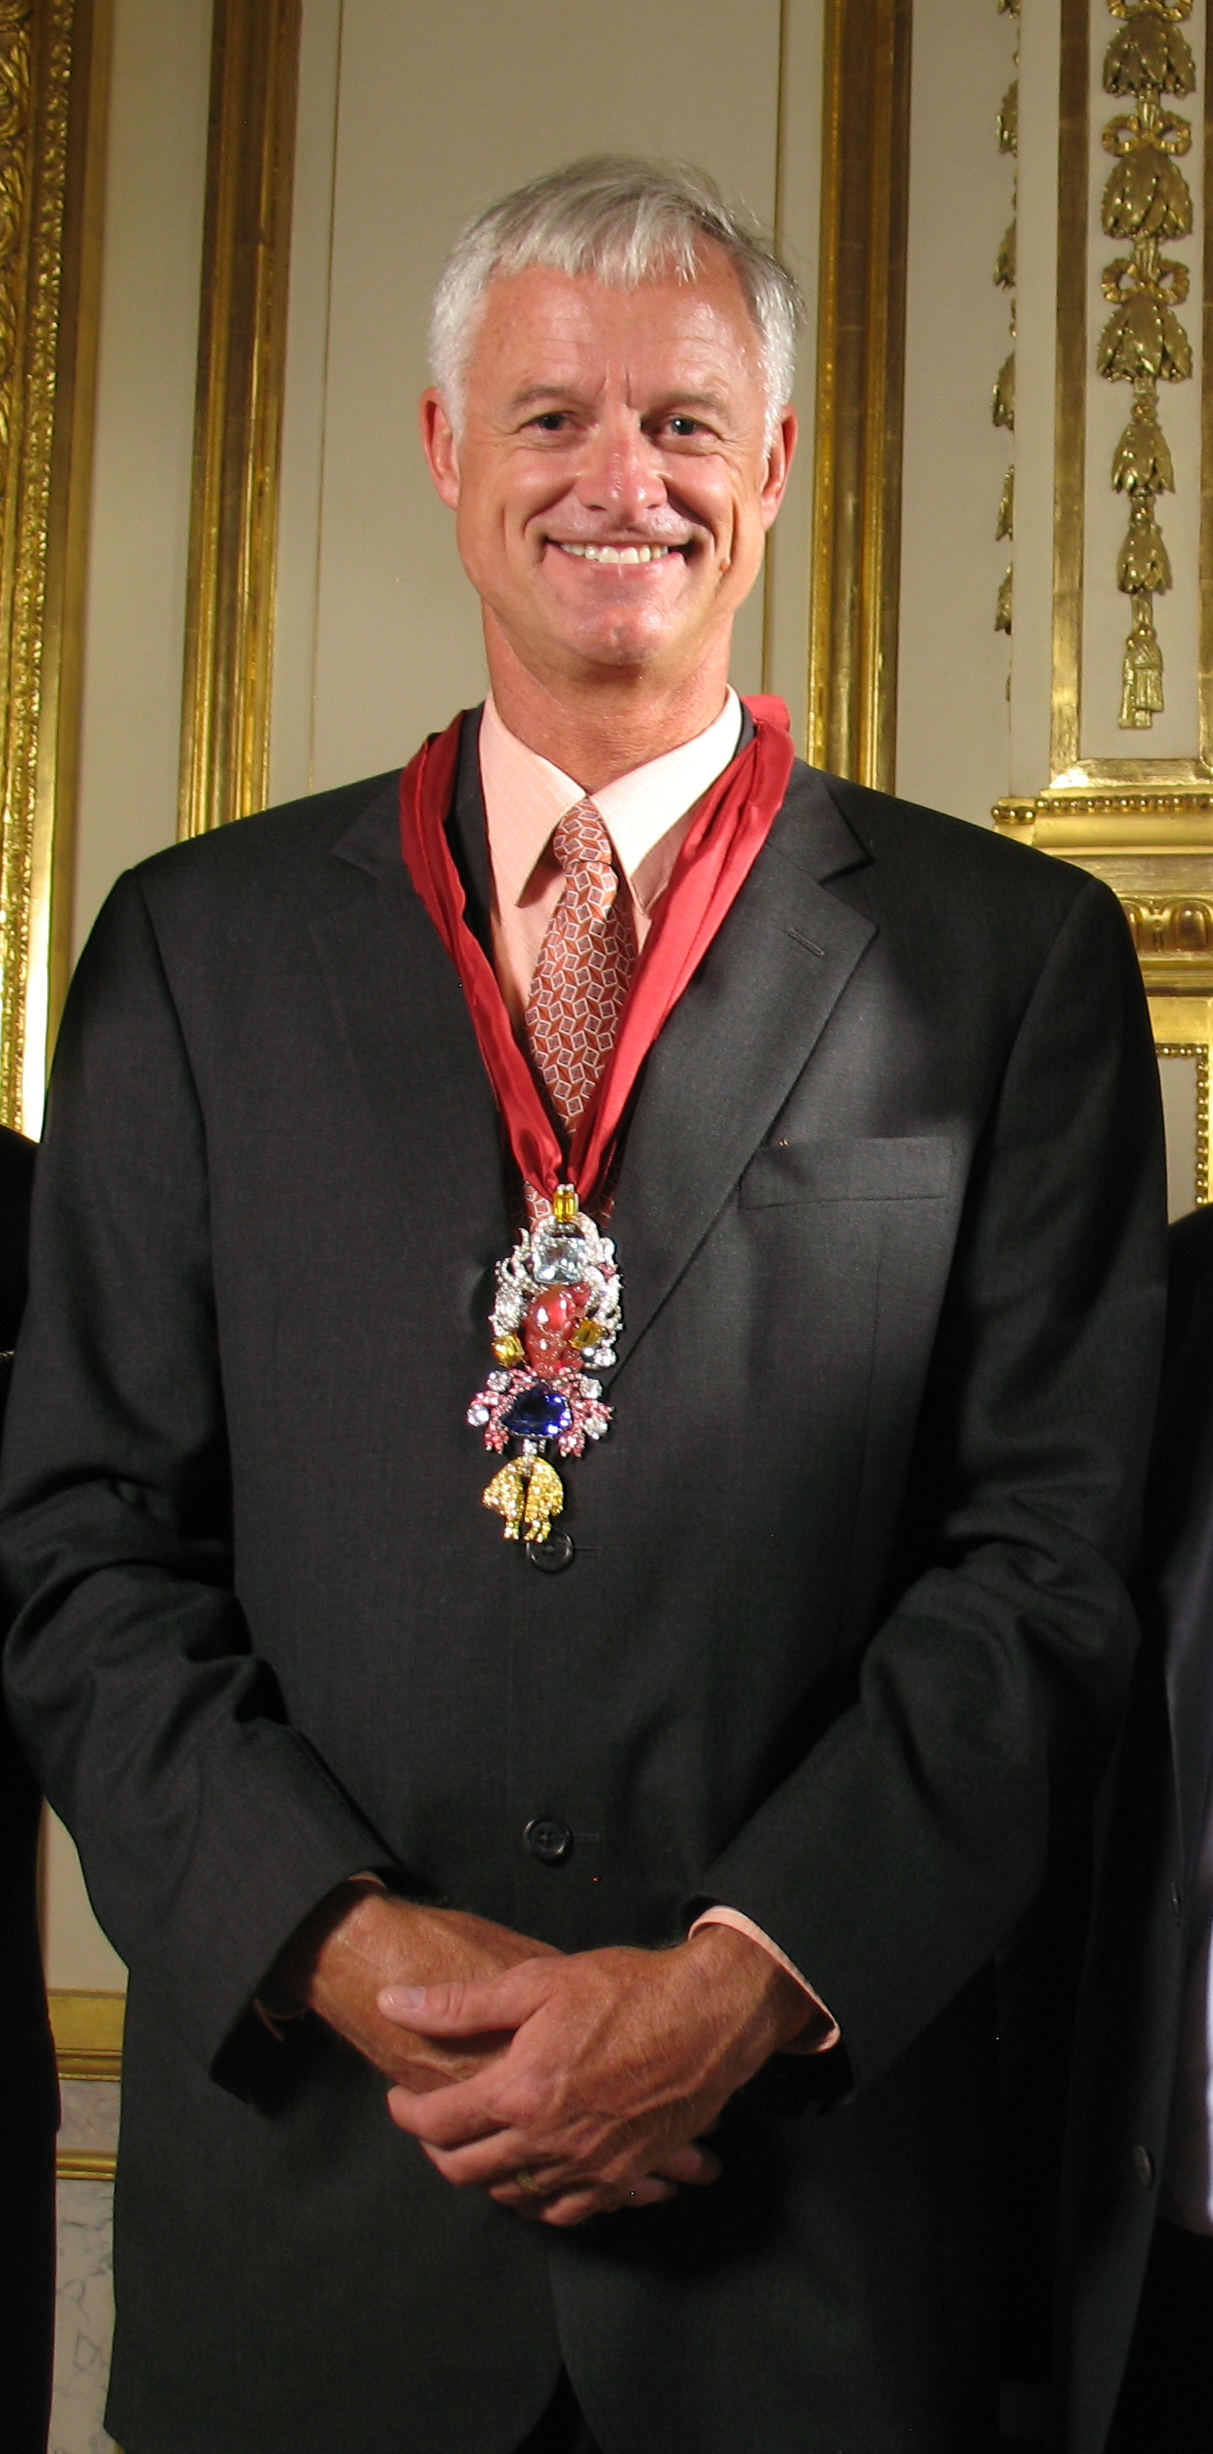 Image:  Scott Sucher wears the Order of the Golden Fleece encompassing the French Blue and other spectacular gems.